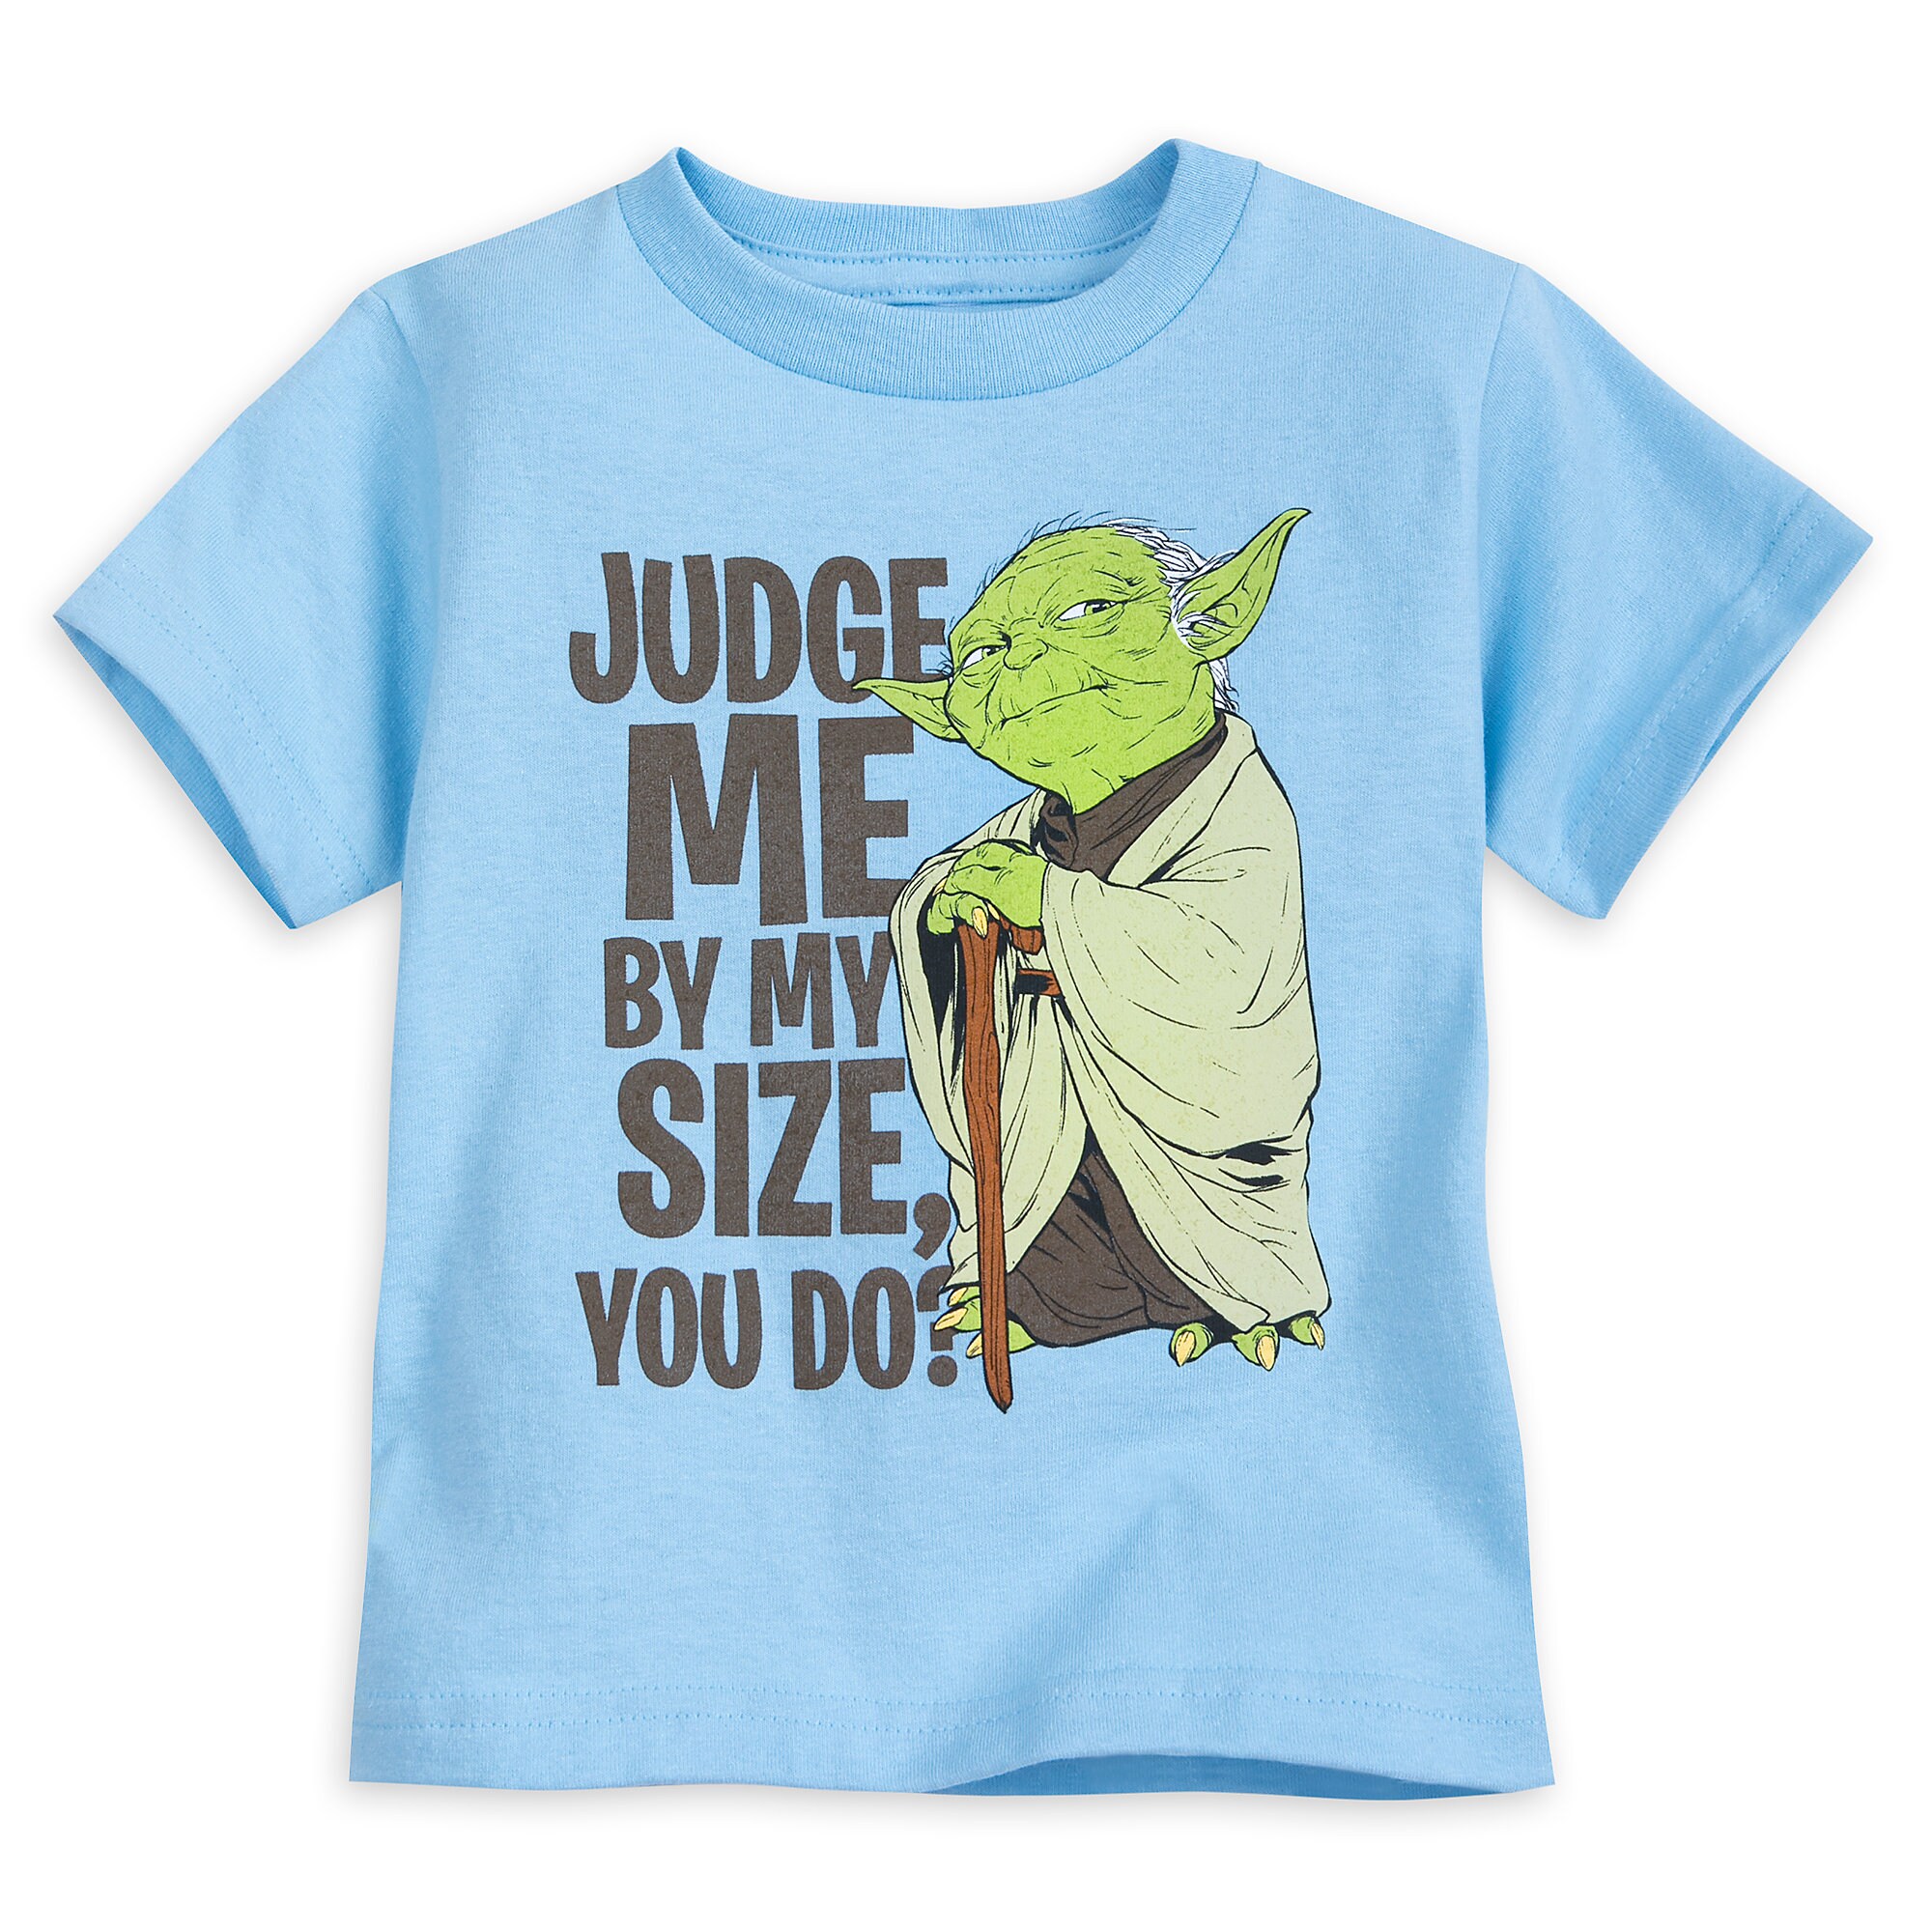 Yoda ''Judge Me By My Size, You Do?'' T-Shirt for Toddlers